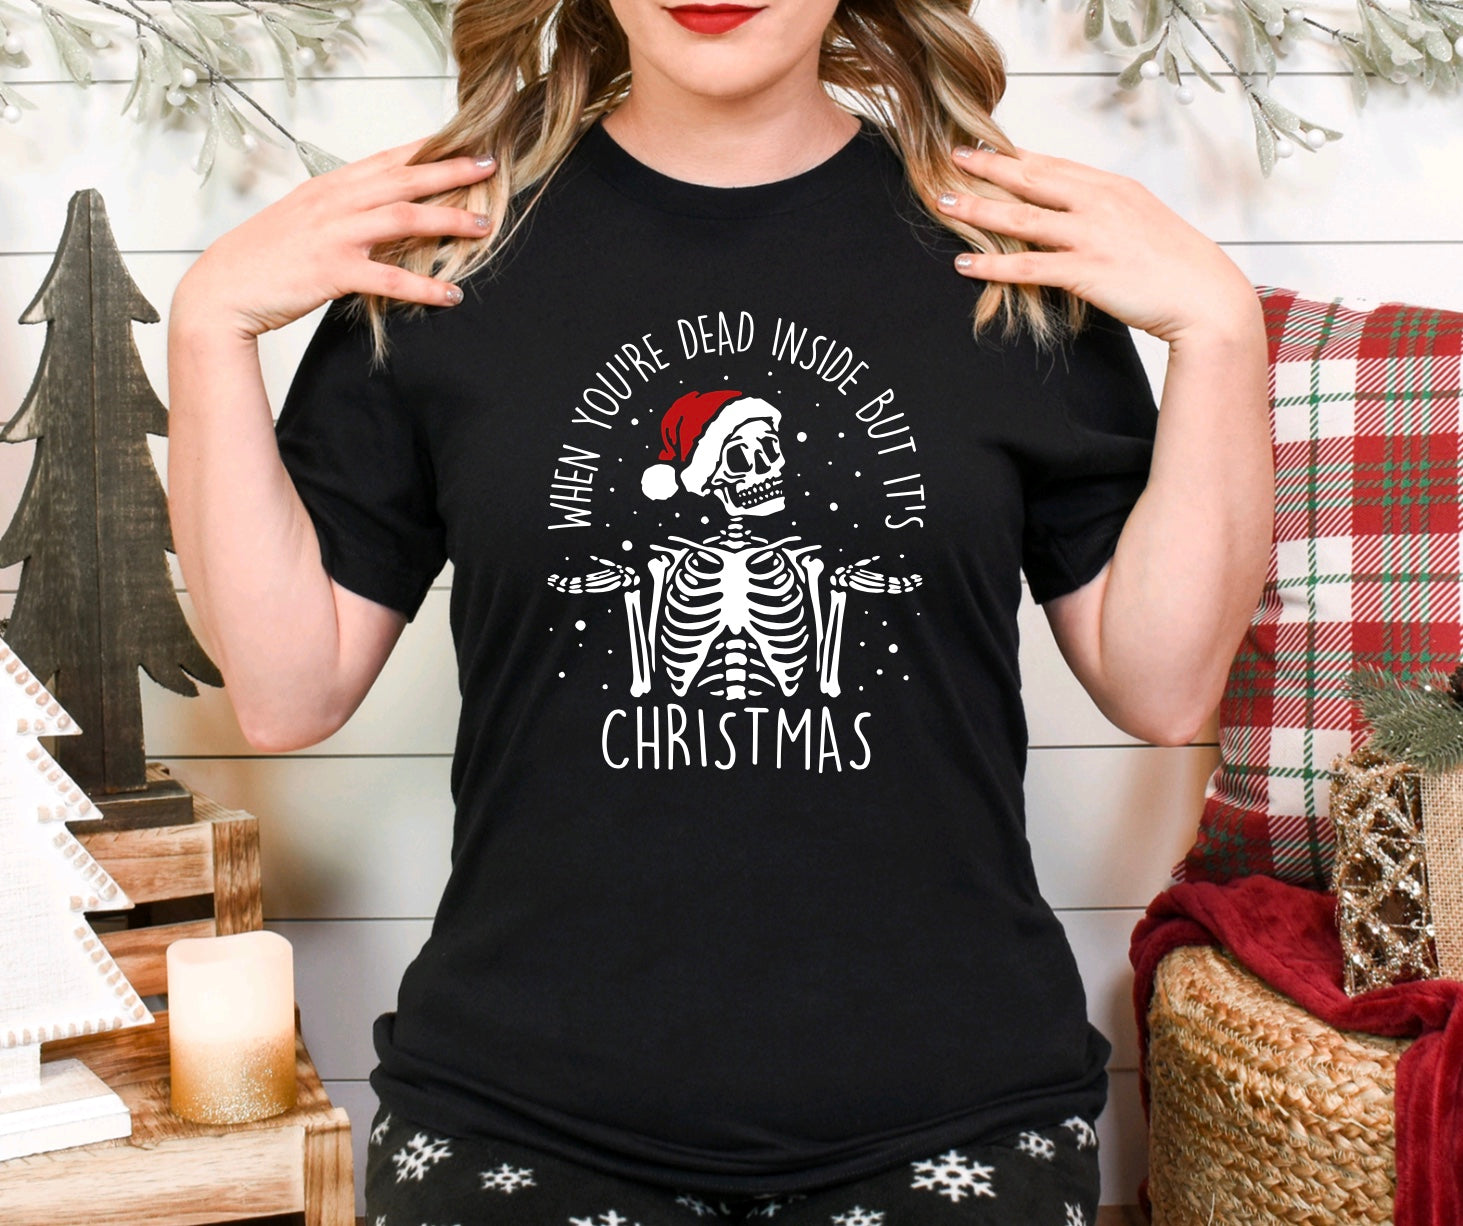 When you’re dead inside but it’s Christmas skeleton Christmas t-shirt in black